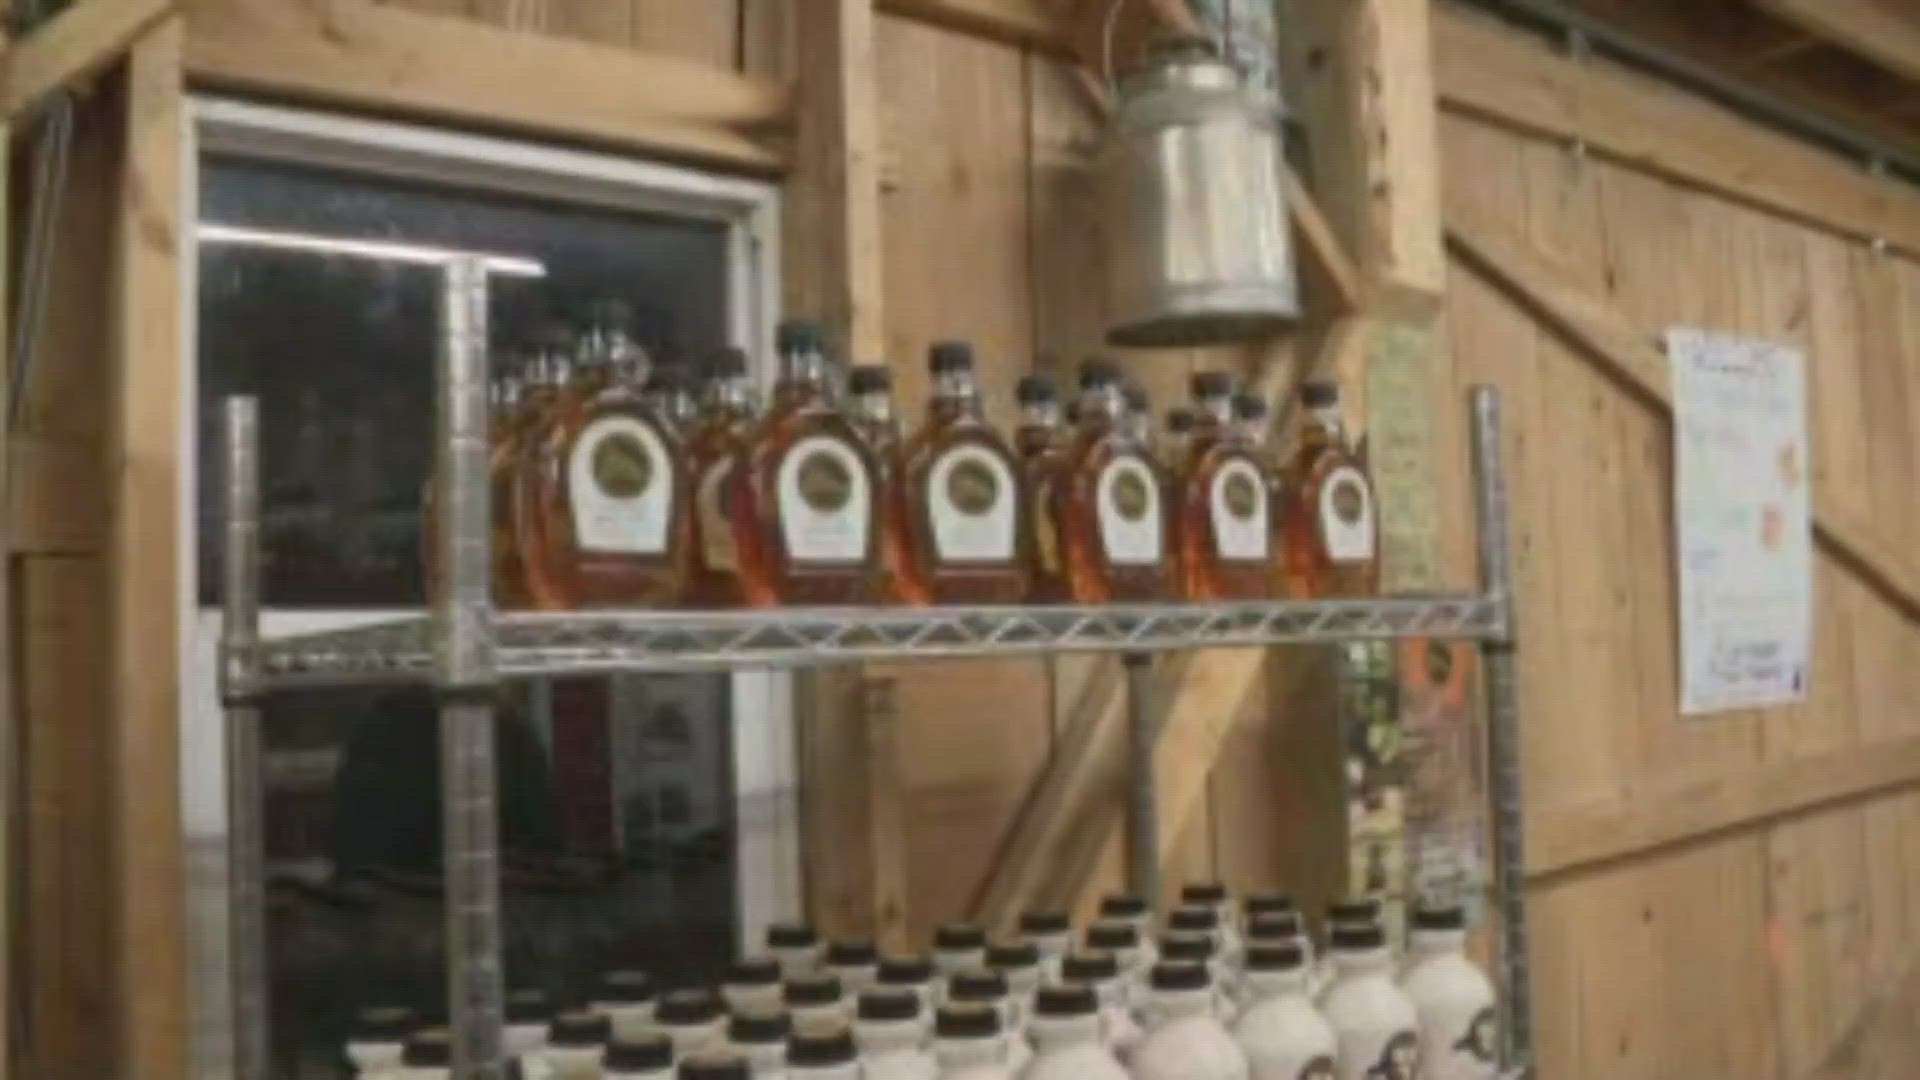 Daybreak's Kevin O'Neill shares the delicious details of Maple Weekend in WNY